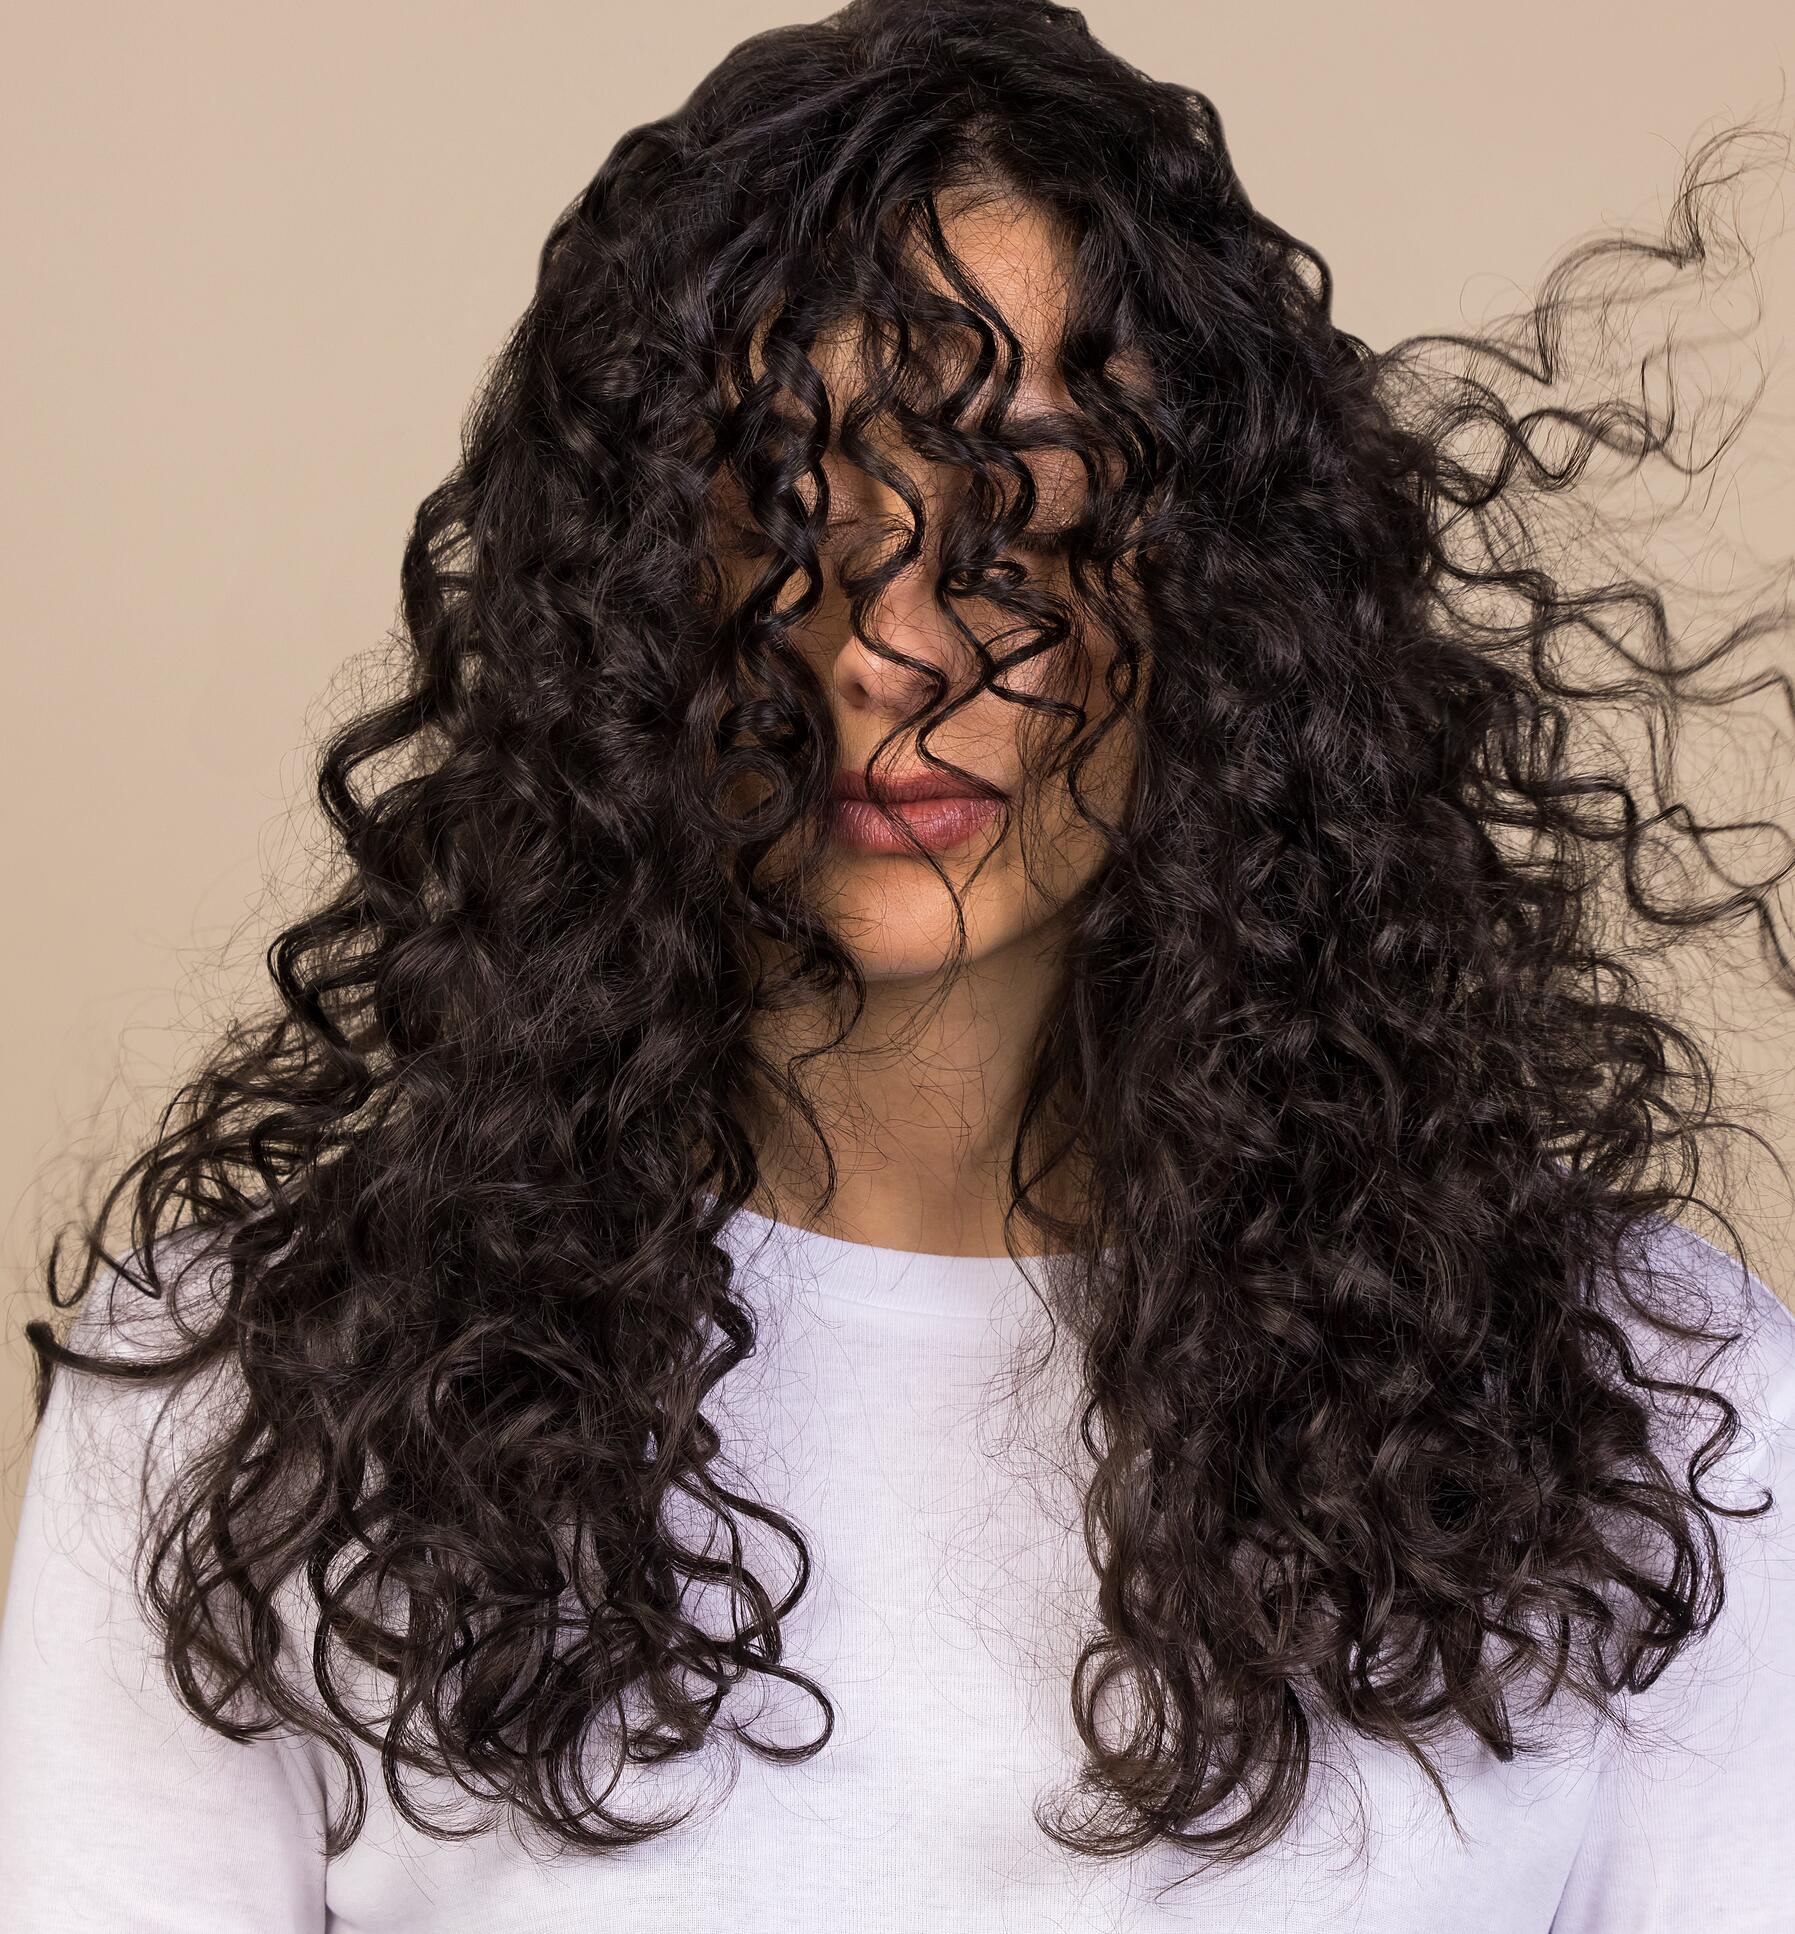 Curly hair: how to get beautiful curls?